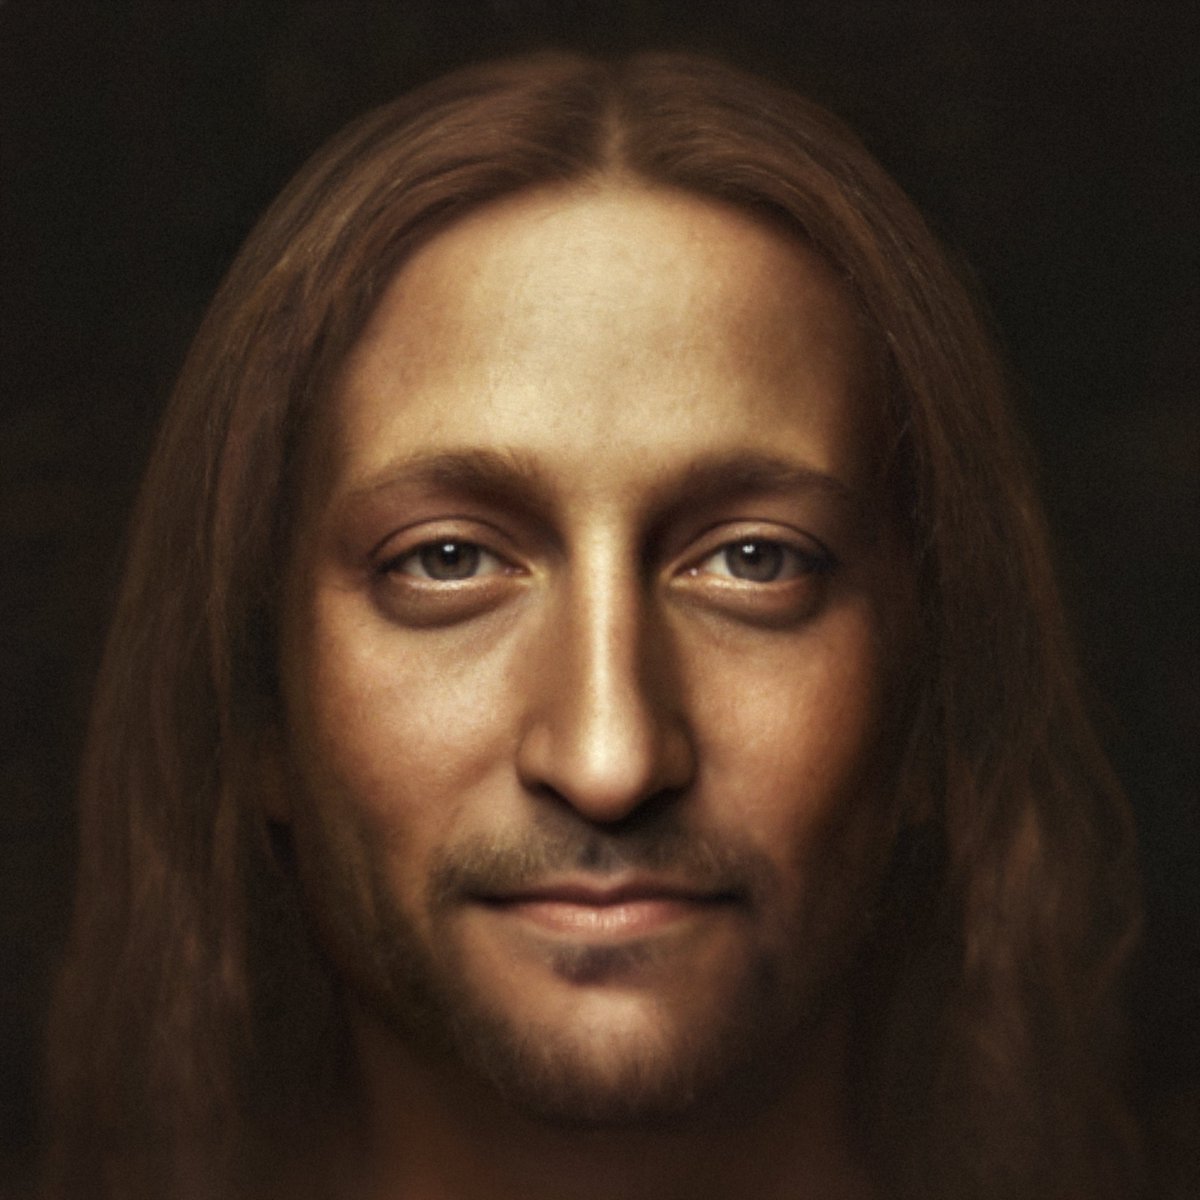 congrats @fffflood for finally picking up my classsic Leonardo impression on #tezos!
🔥🔥🔥
In 'Those who see. Those who see when they are shown. Those who do not see.' (2021) I have tried to combine DaVinci's  Salvator Mundi with some of his self-portraits using Stylegan, base…